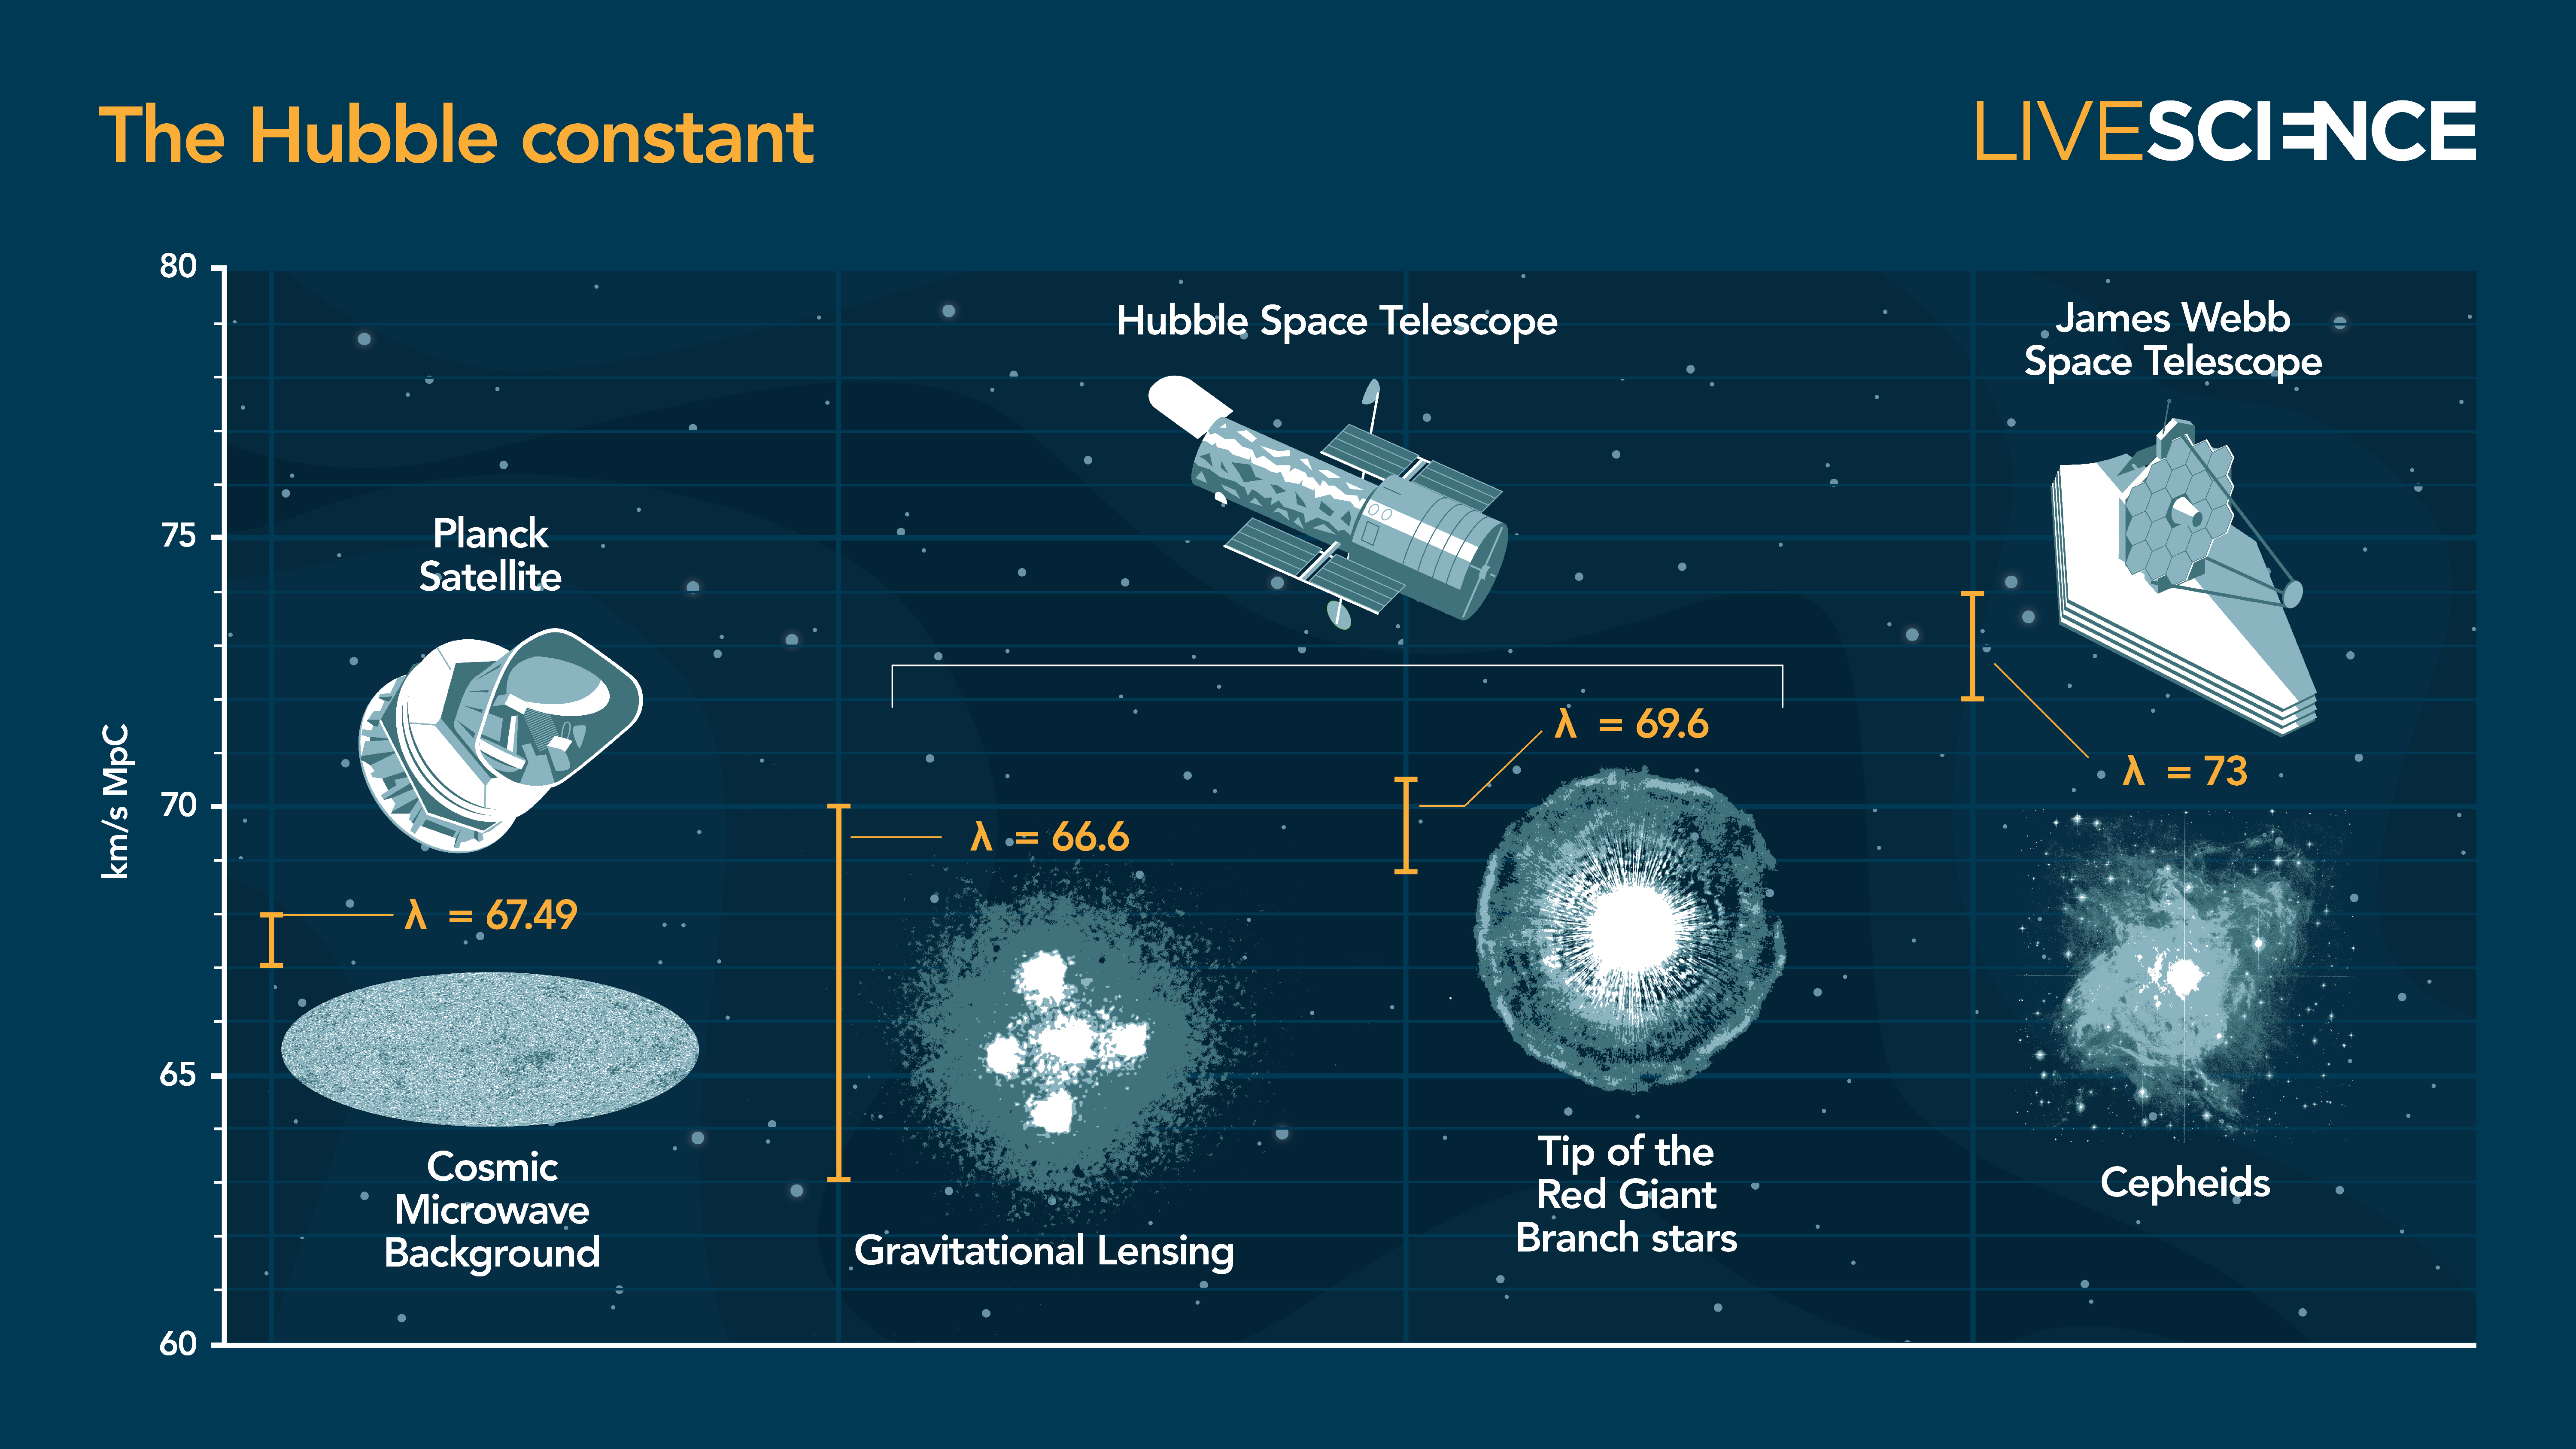 A collection of some of the most recent measurements of the Hubble constant. From left to right, the sources used to measure its value are: The cosmic microwave background images by the European Space Agency's Planck satellite; gravitational lensing and tip of the Red Giant Branch stars measured by NASA's Hubble space telescope; and cepheid stars measured by the James Webb space telescope